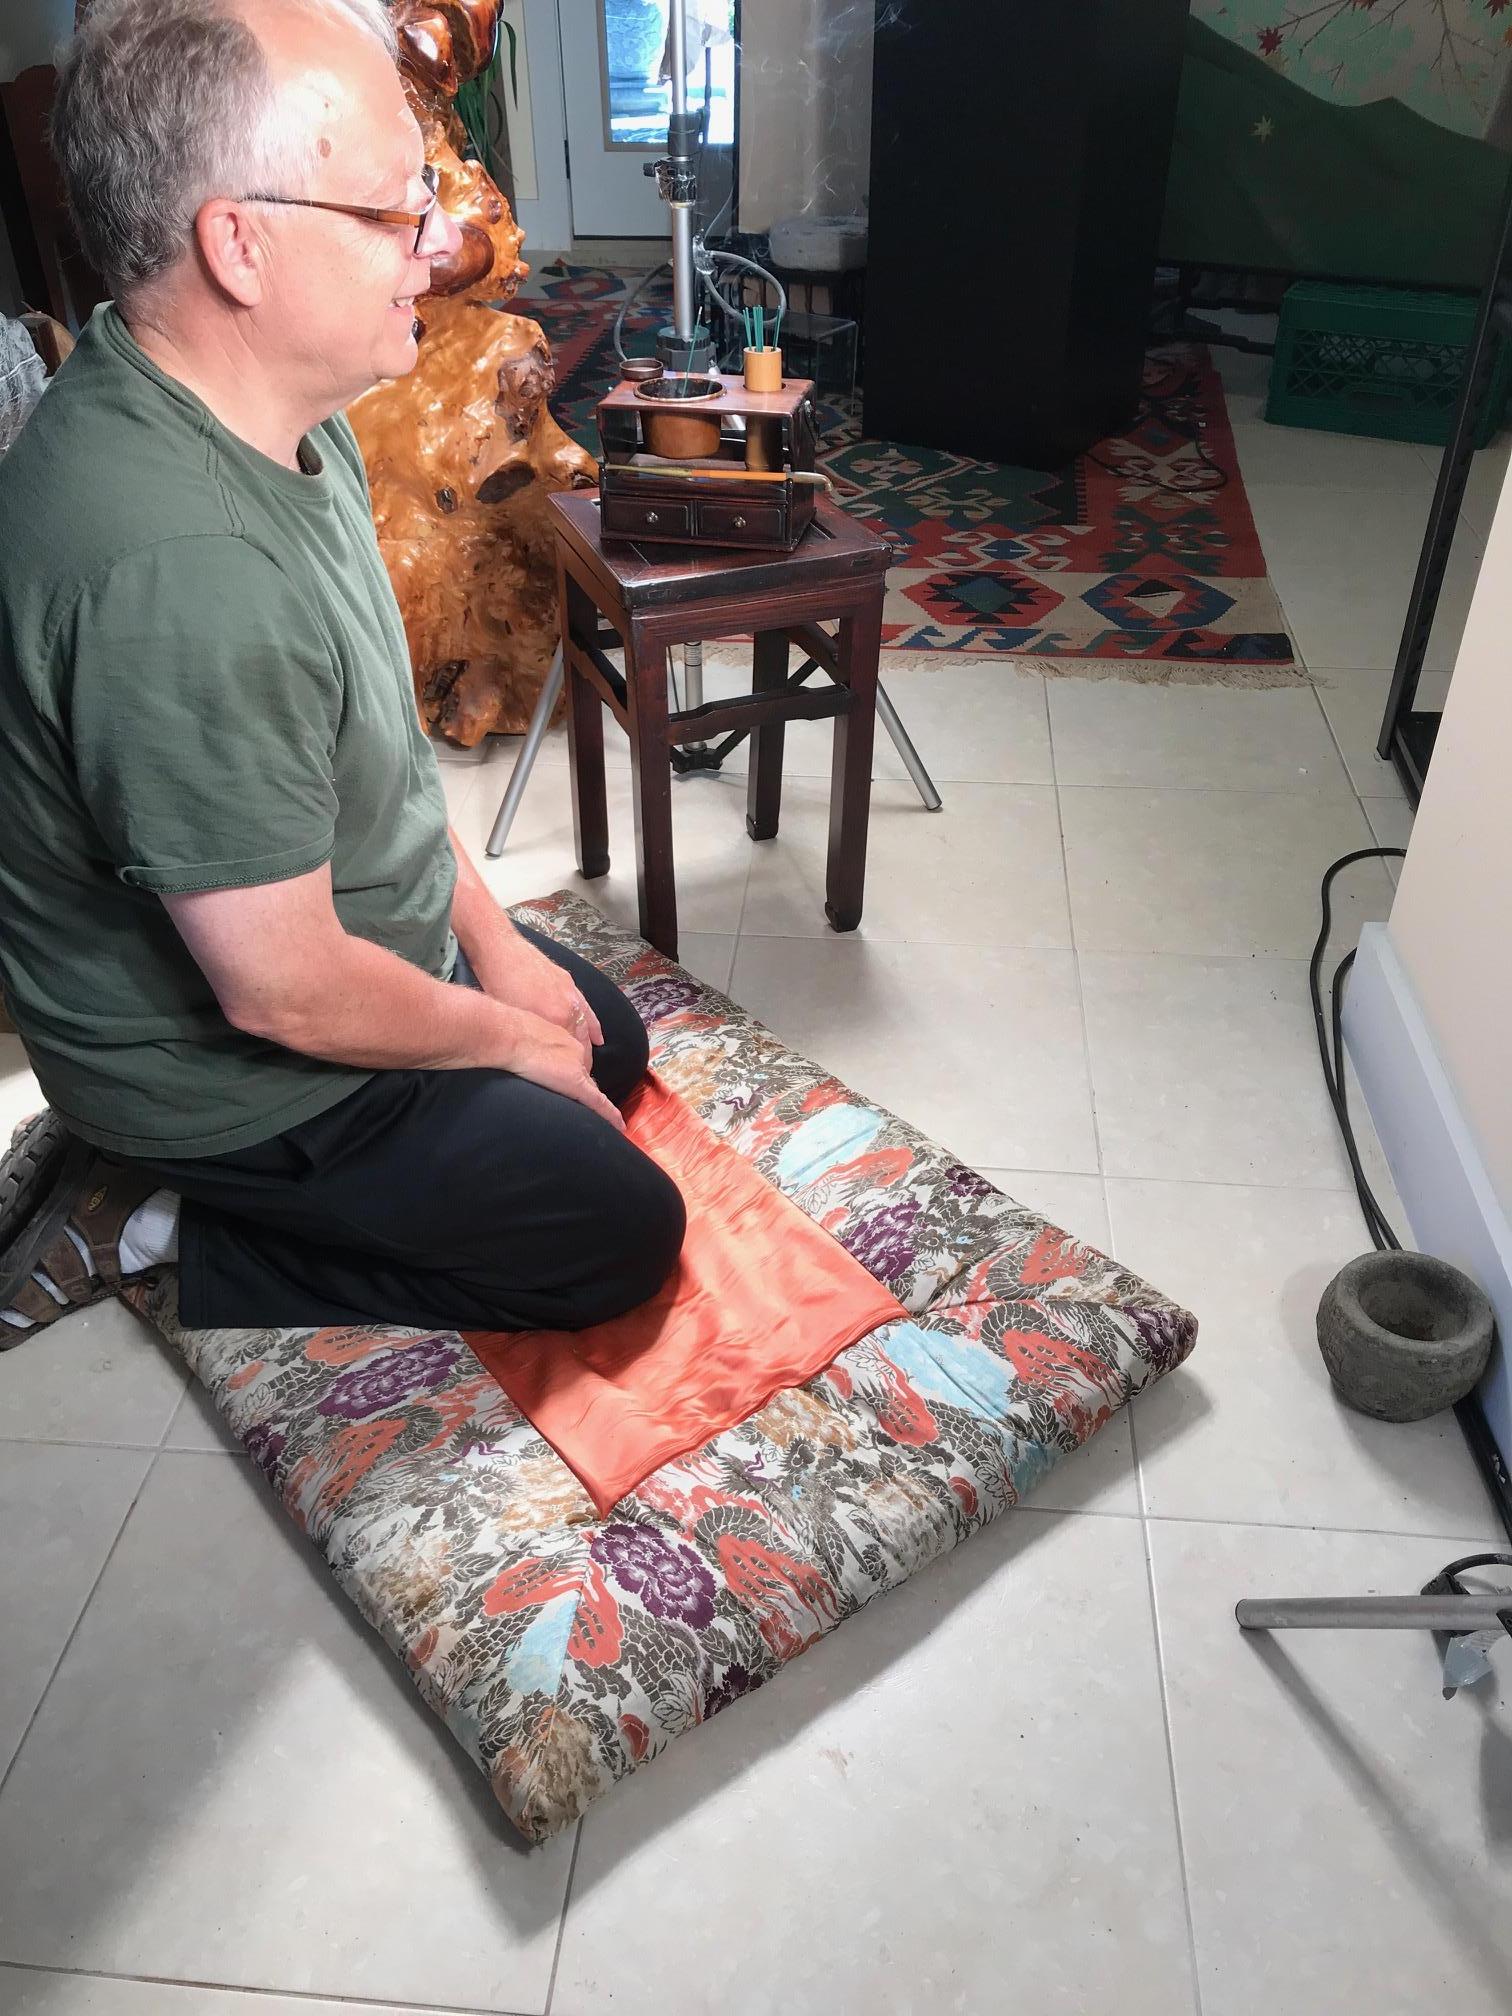 Rare find from our last Japanese Acquisition trip to Japan. 

A first. An authentic large Japanese antique meditation cushion or pillow rug crafted from beautiful silk. It dates to about 80 years ago and is still in fine usable